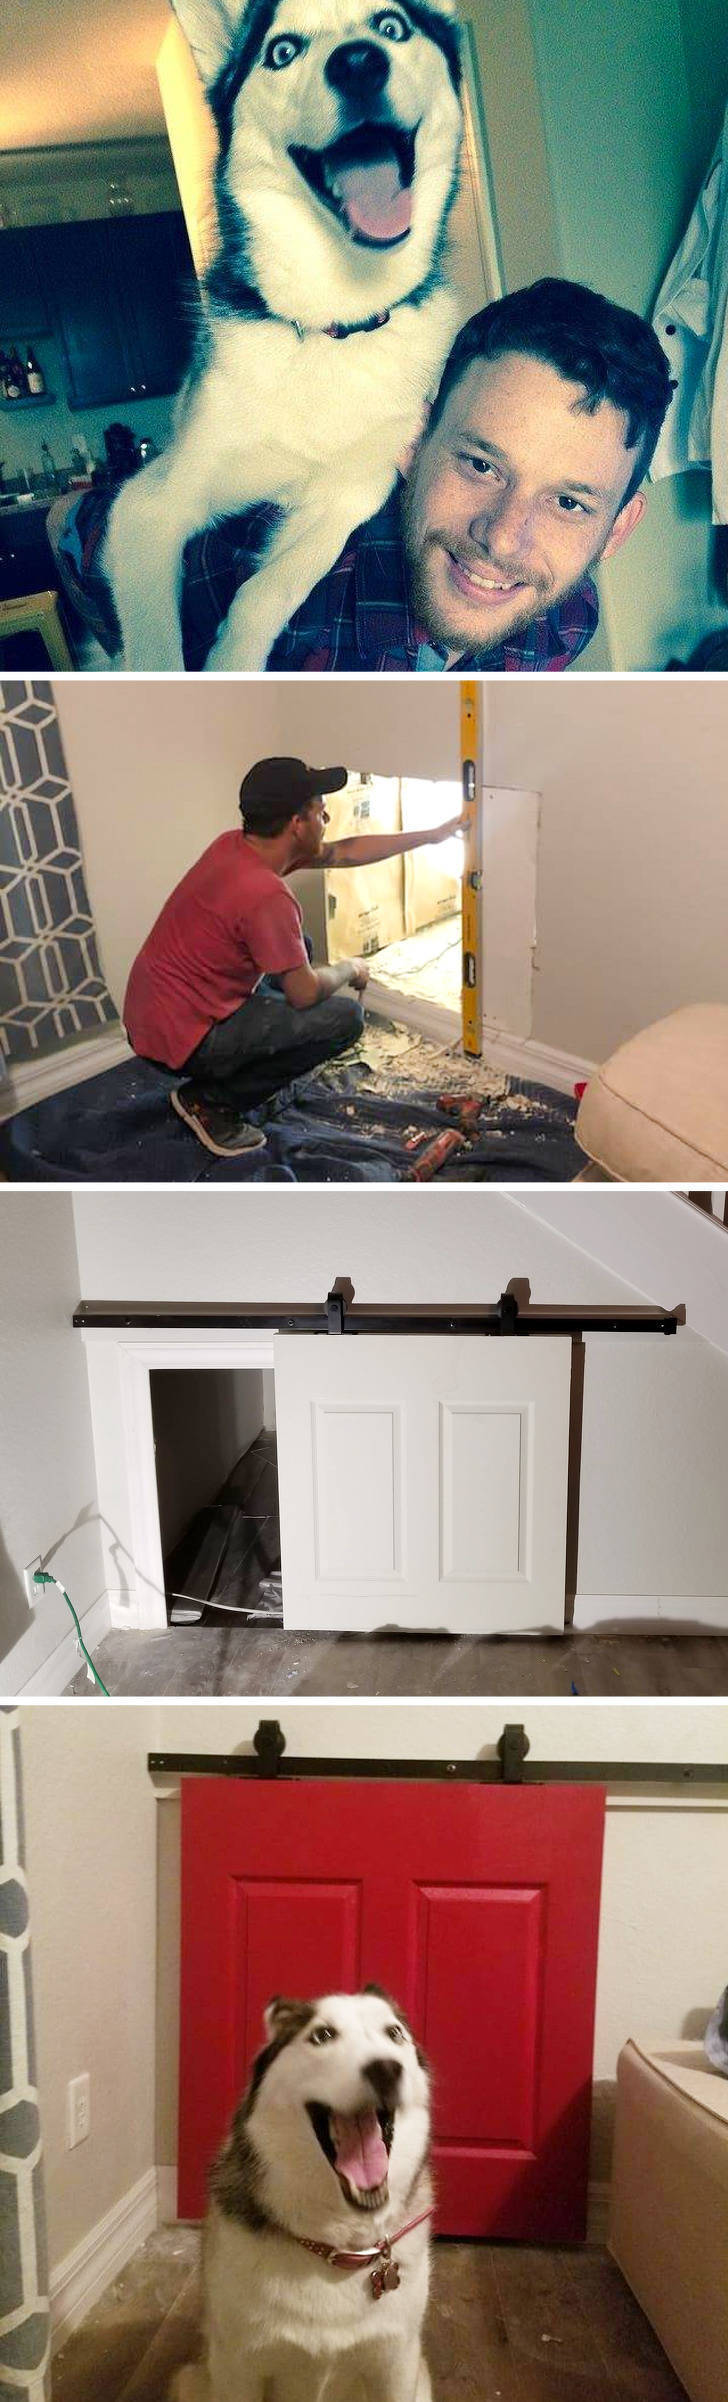 People Who Can Turn Anything Into Amazing DIY Creations